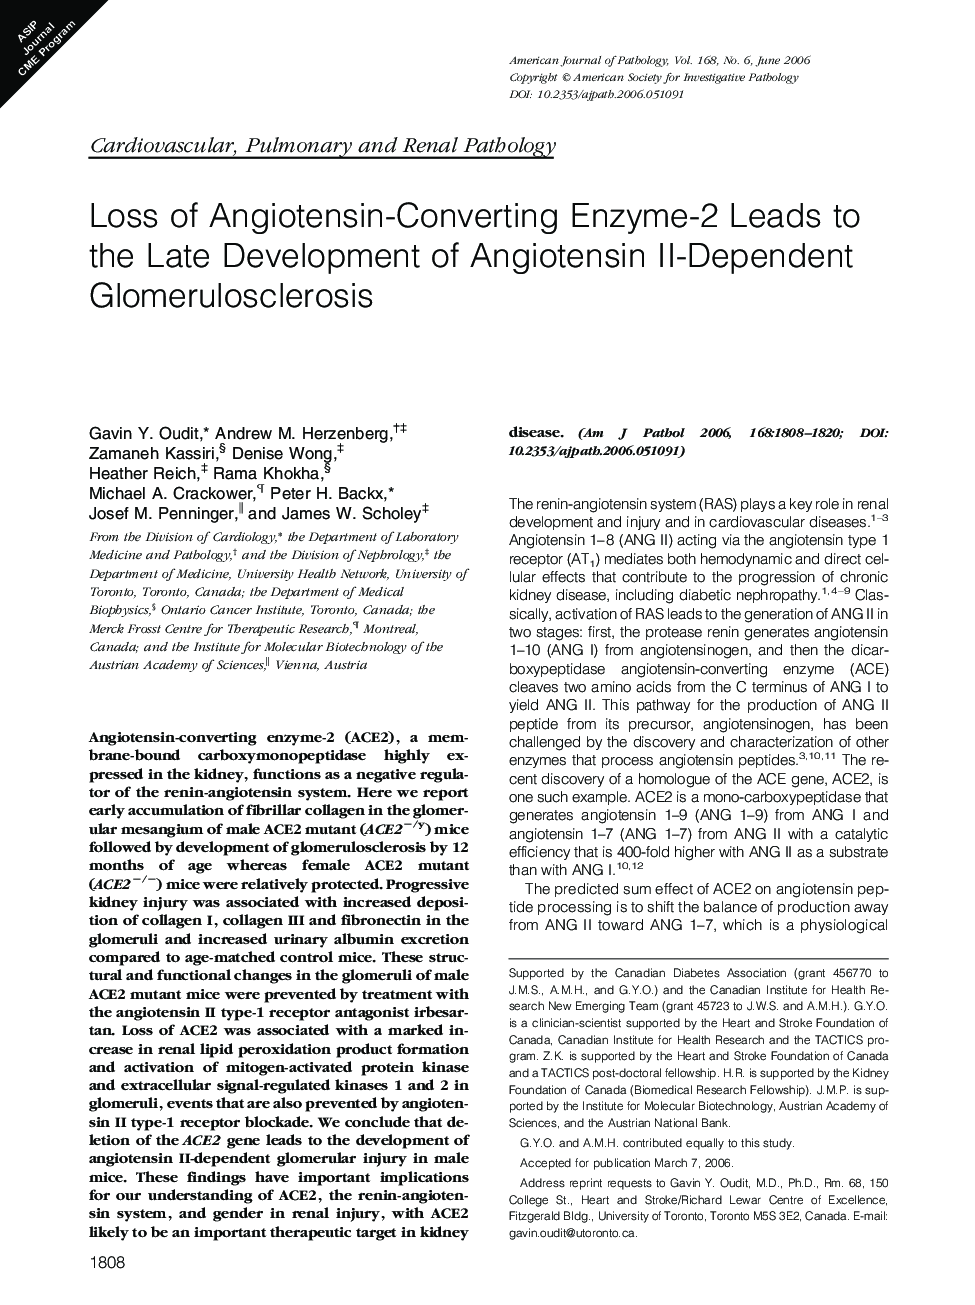 Loss of Angiotensin-Converting Enzyme-2 Leads to the Late Development of Angiotensin II-Dependent Glomerulosclerosis 